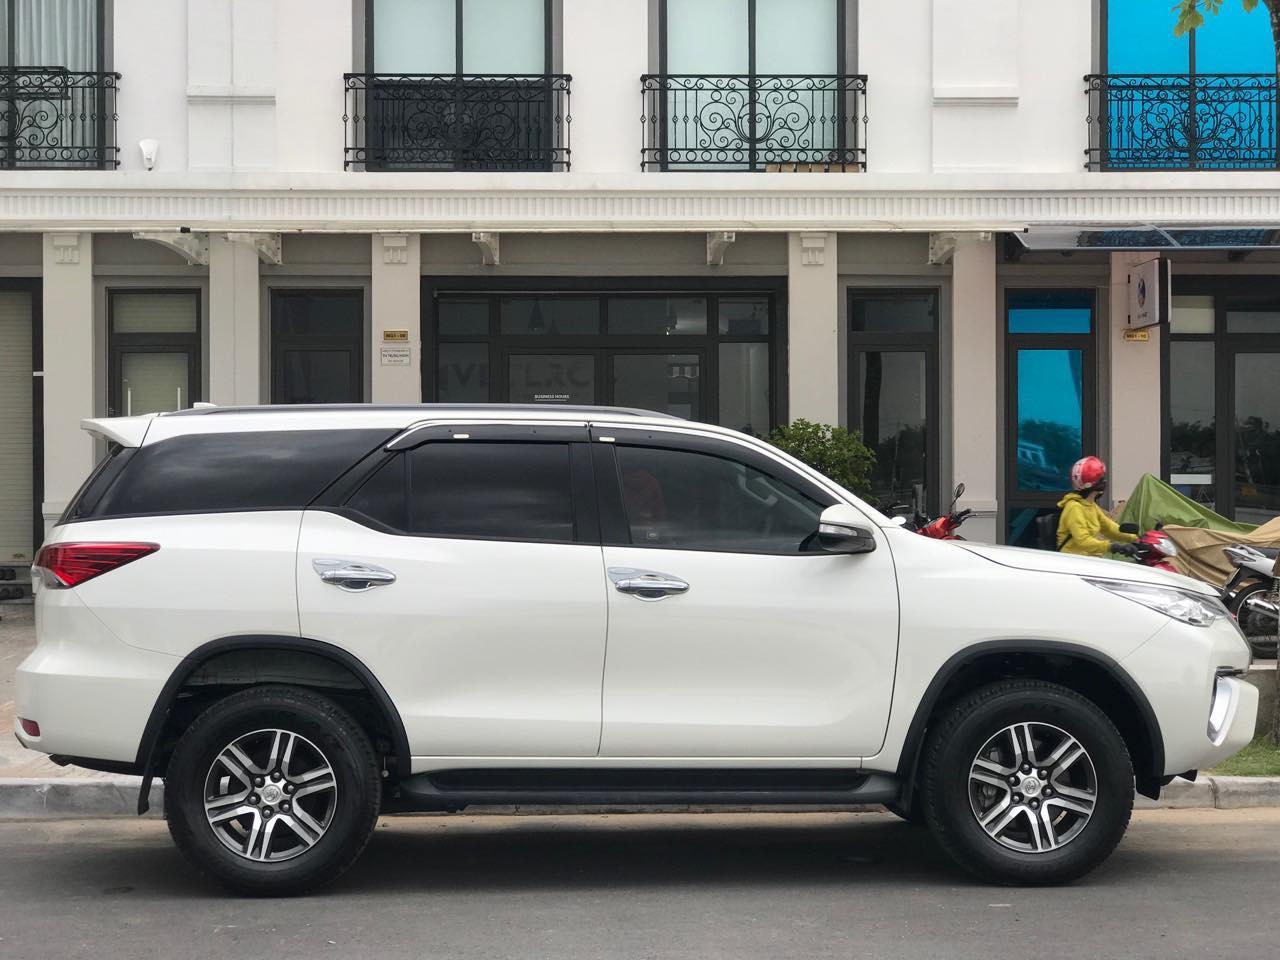 Thuê xe fortuner